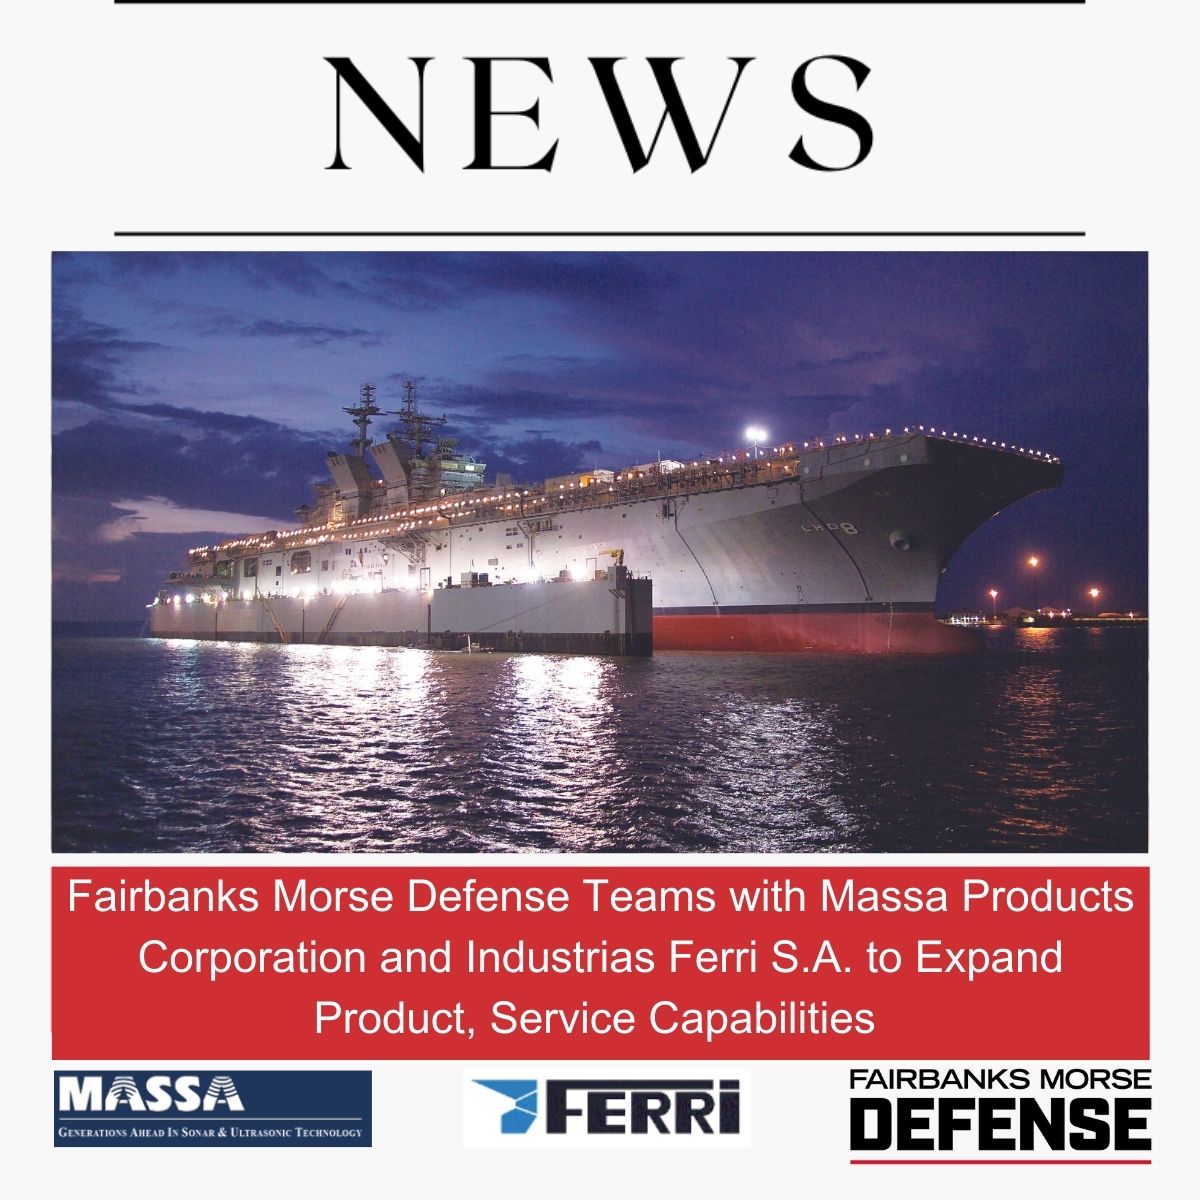 Fairbanks Morse Defense Teams with Massa Products Corporation and Industrias Ferri S.A. to Expand Product, Service Capabilities